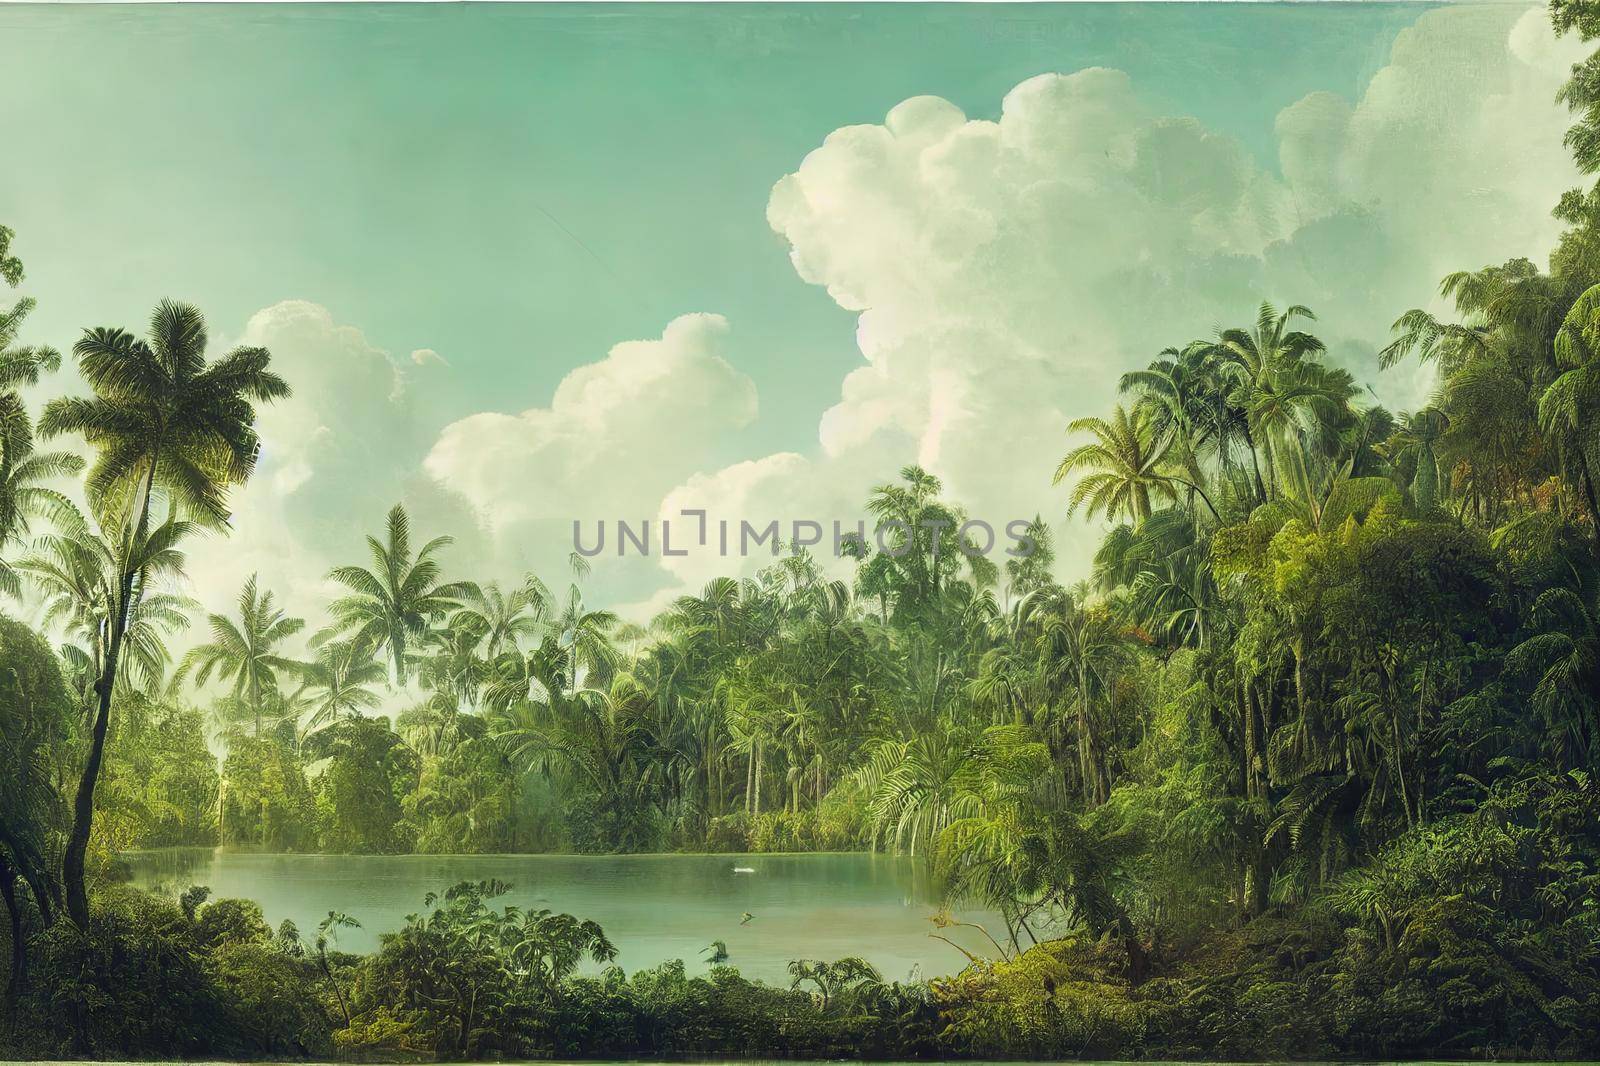 Dense Tropical Forest. Landscape with Lake, Green Fern Trees, Palms, Without People. New Zealand Tropical Woods. Tropical Rainforest Vegetetion. Palm Trees, Lianas and Creepers. Cloudy Sunny Sky.. High quality illustration